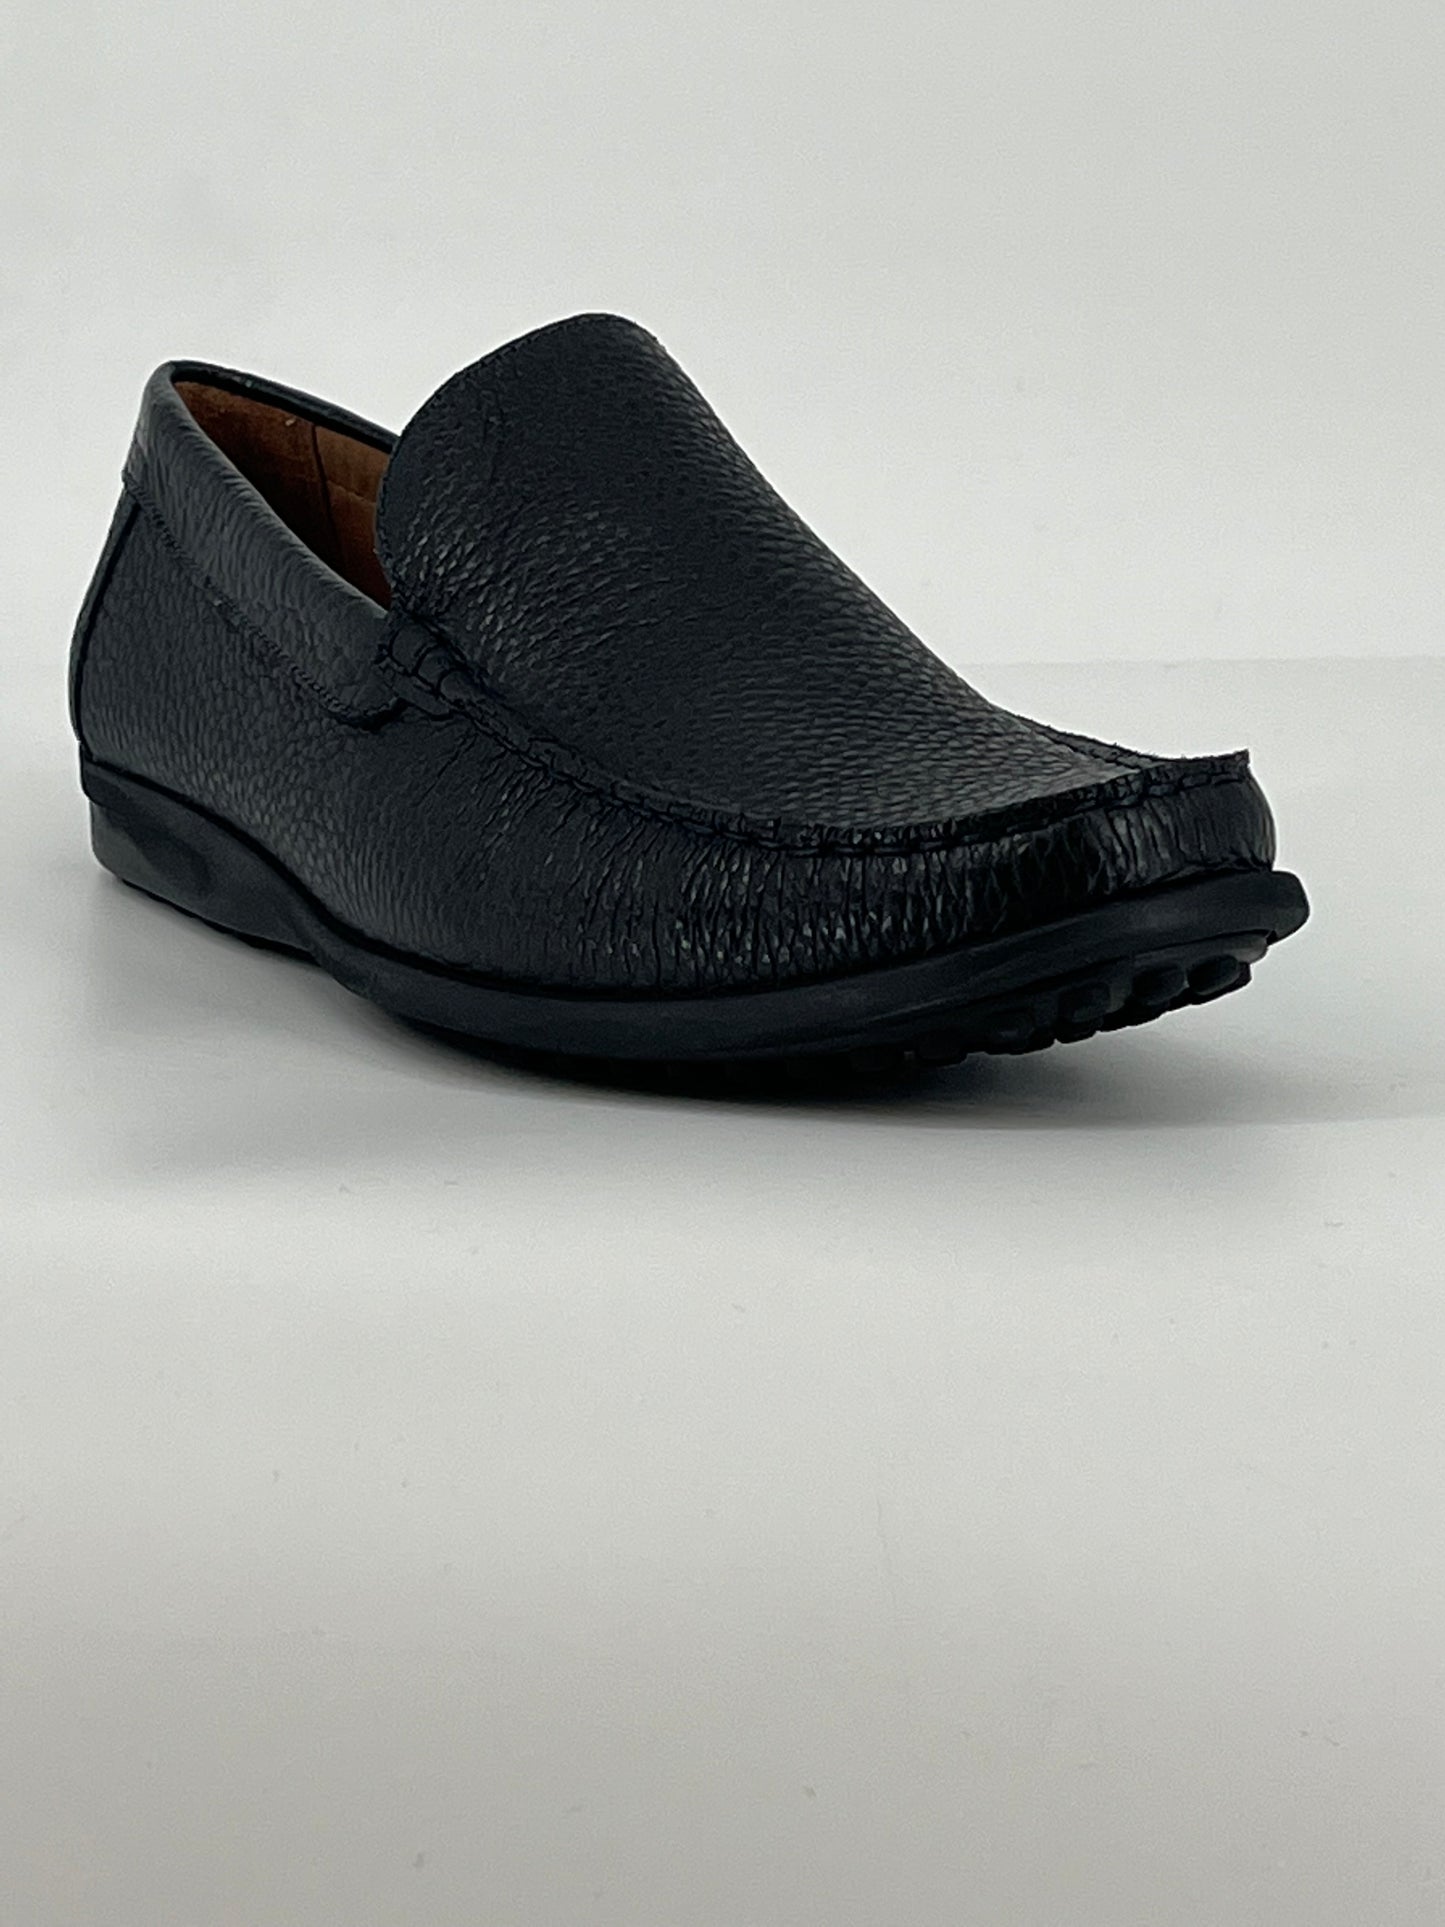 Badesi Loafers Collection